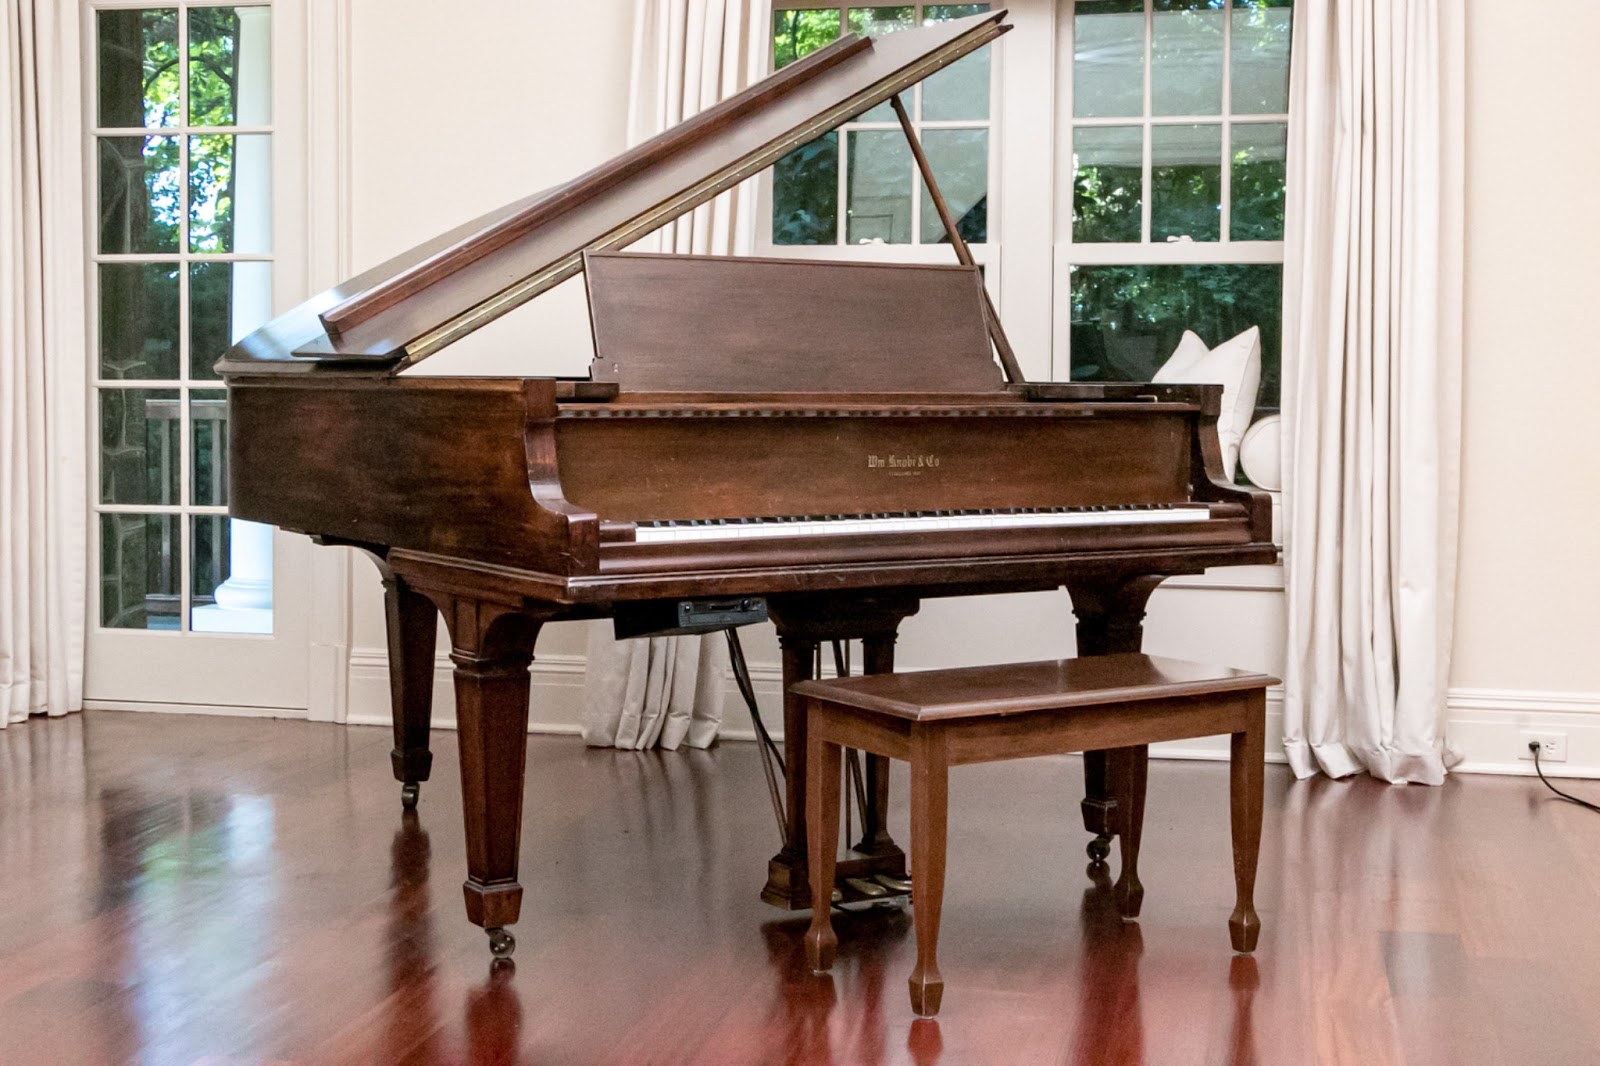 Walnut framed baby grand piano with bench in a white room.